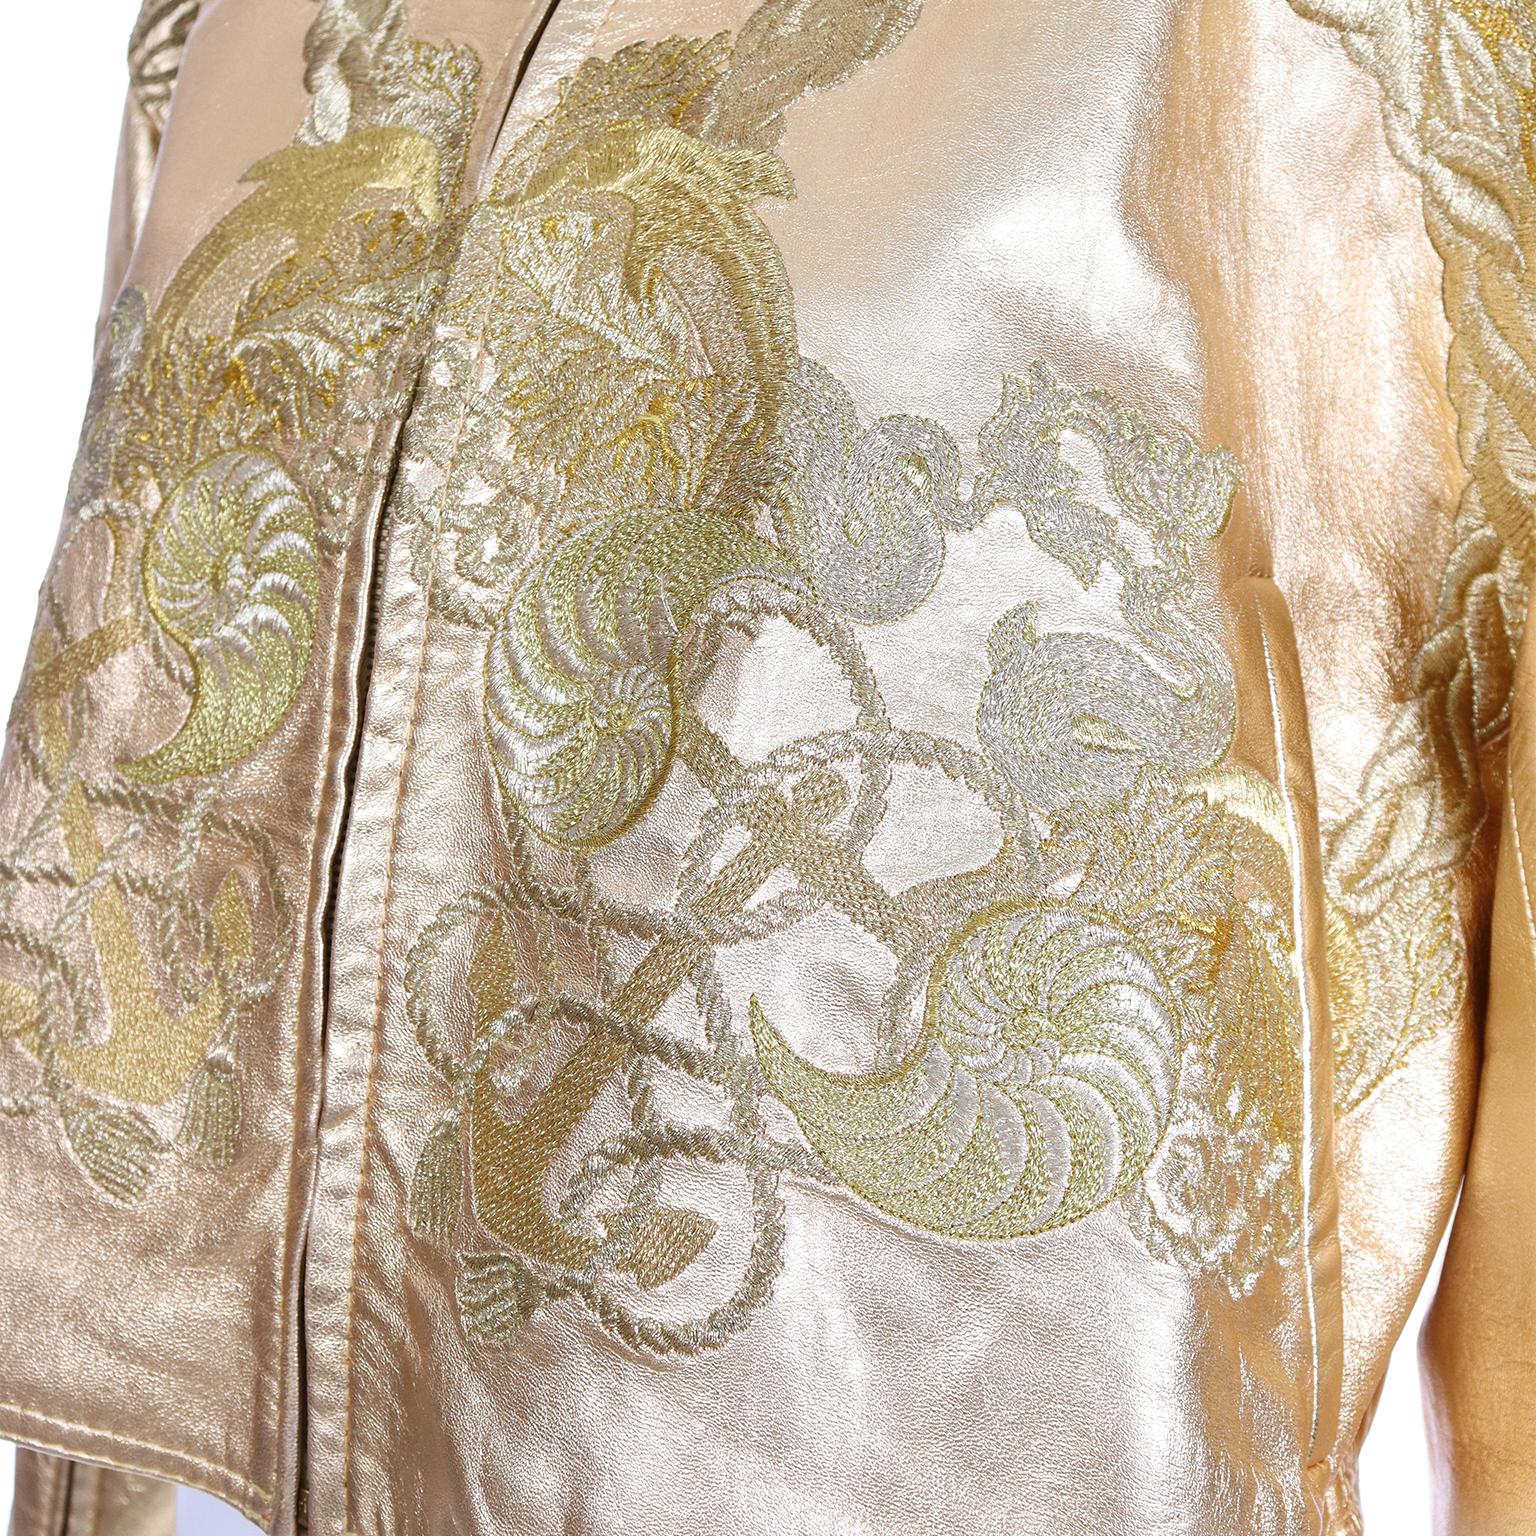 Gianfranco Ferre S/S 1992 Runway Gold Leather Embroidered Ocean Theme Jacket For Sale 5